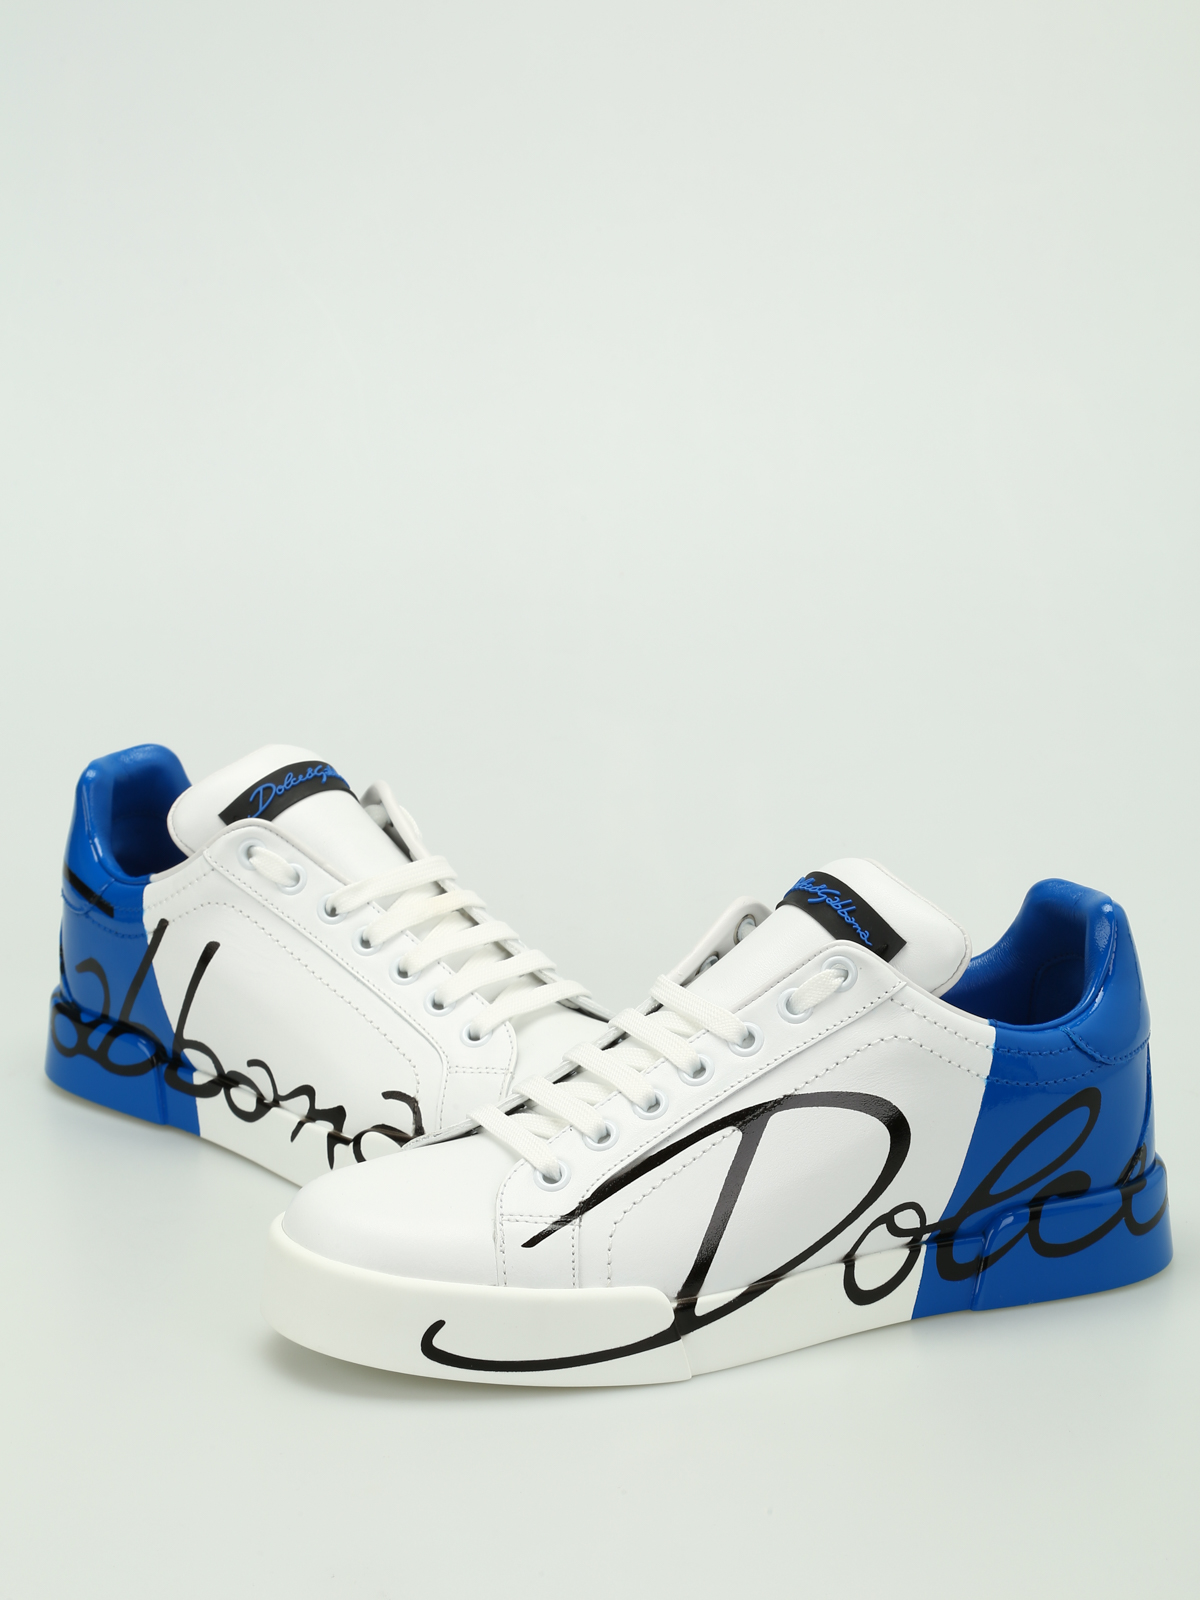 dolce and gabbana sneakers blue